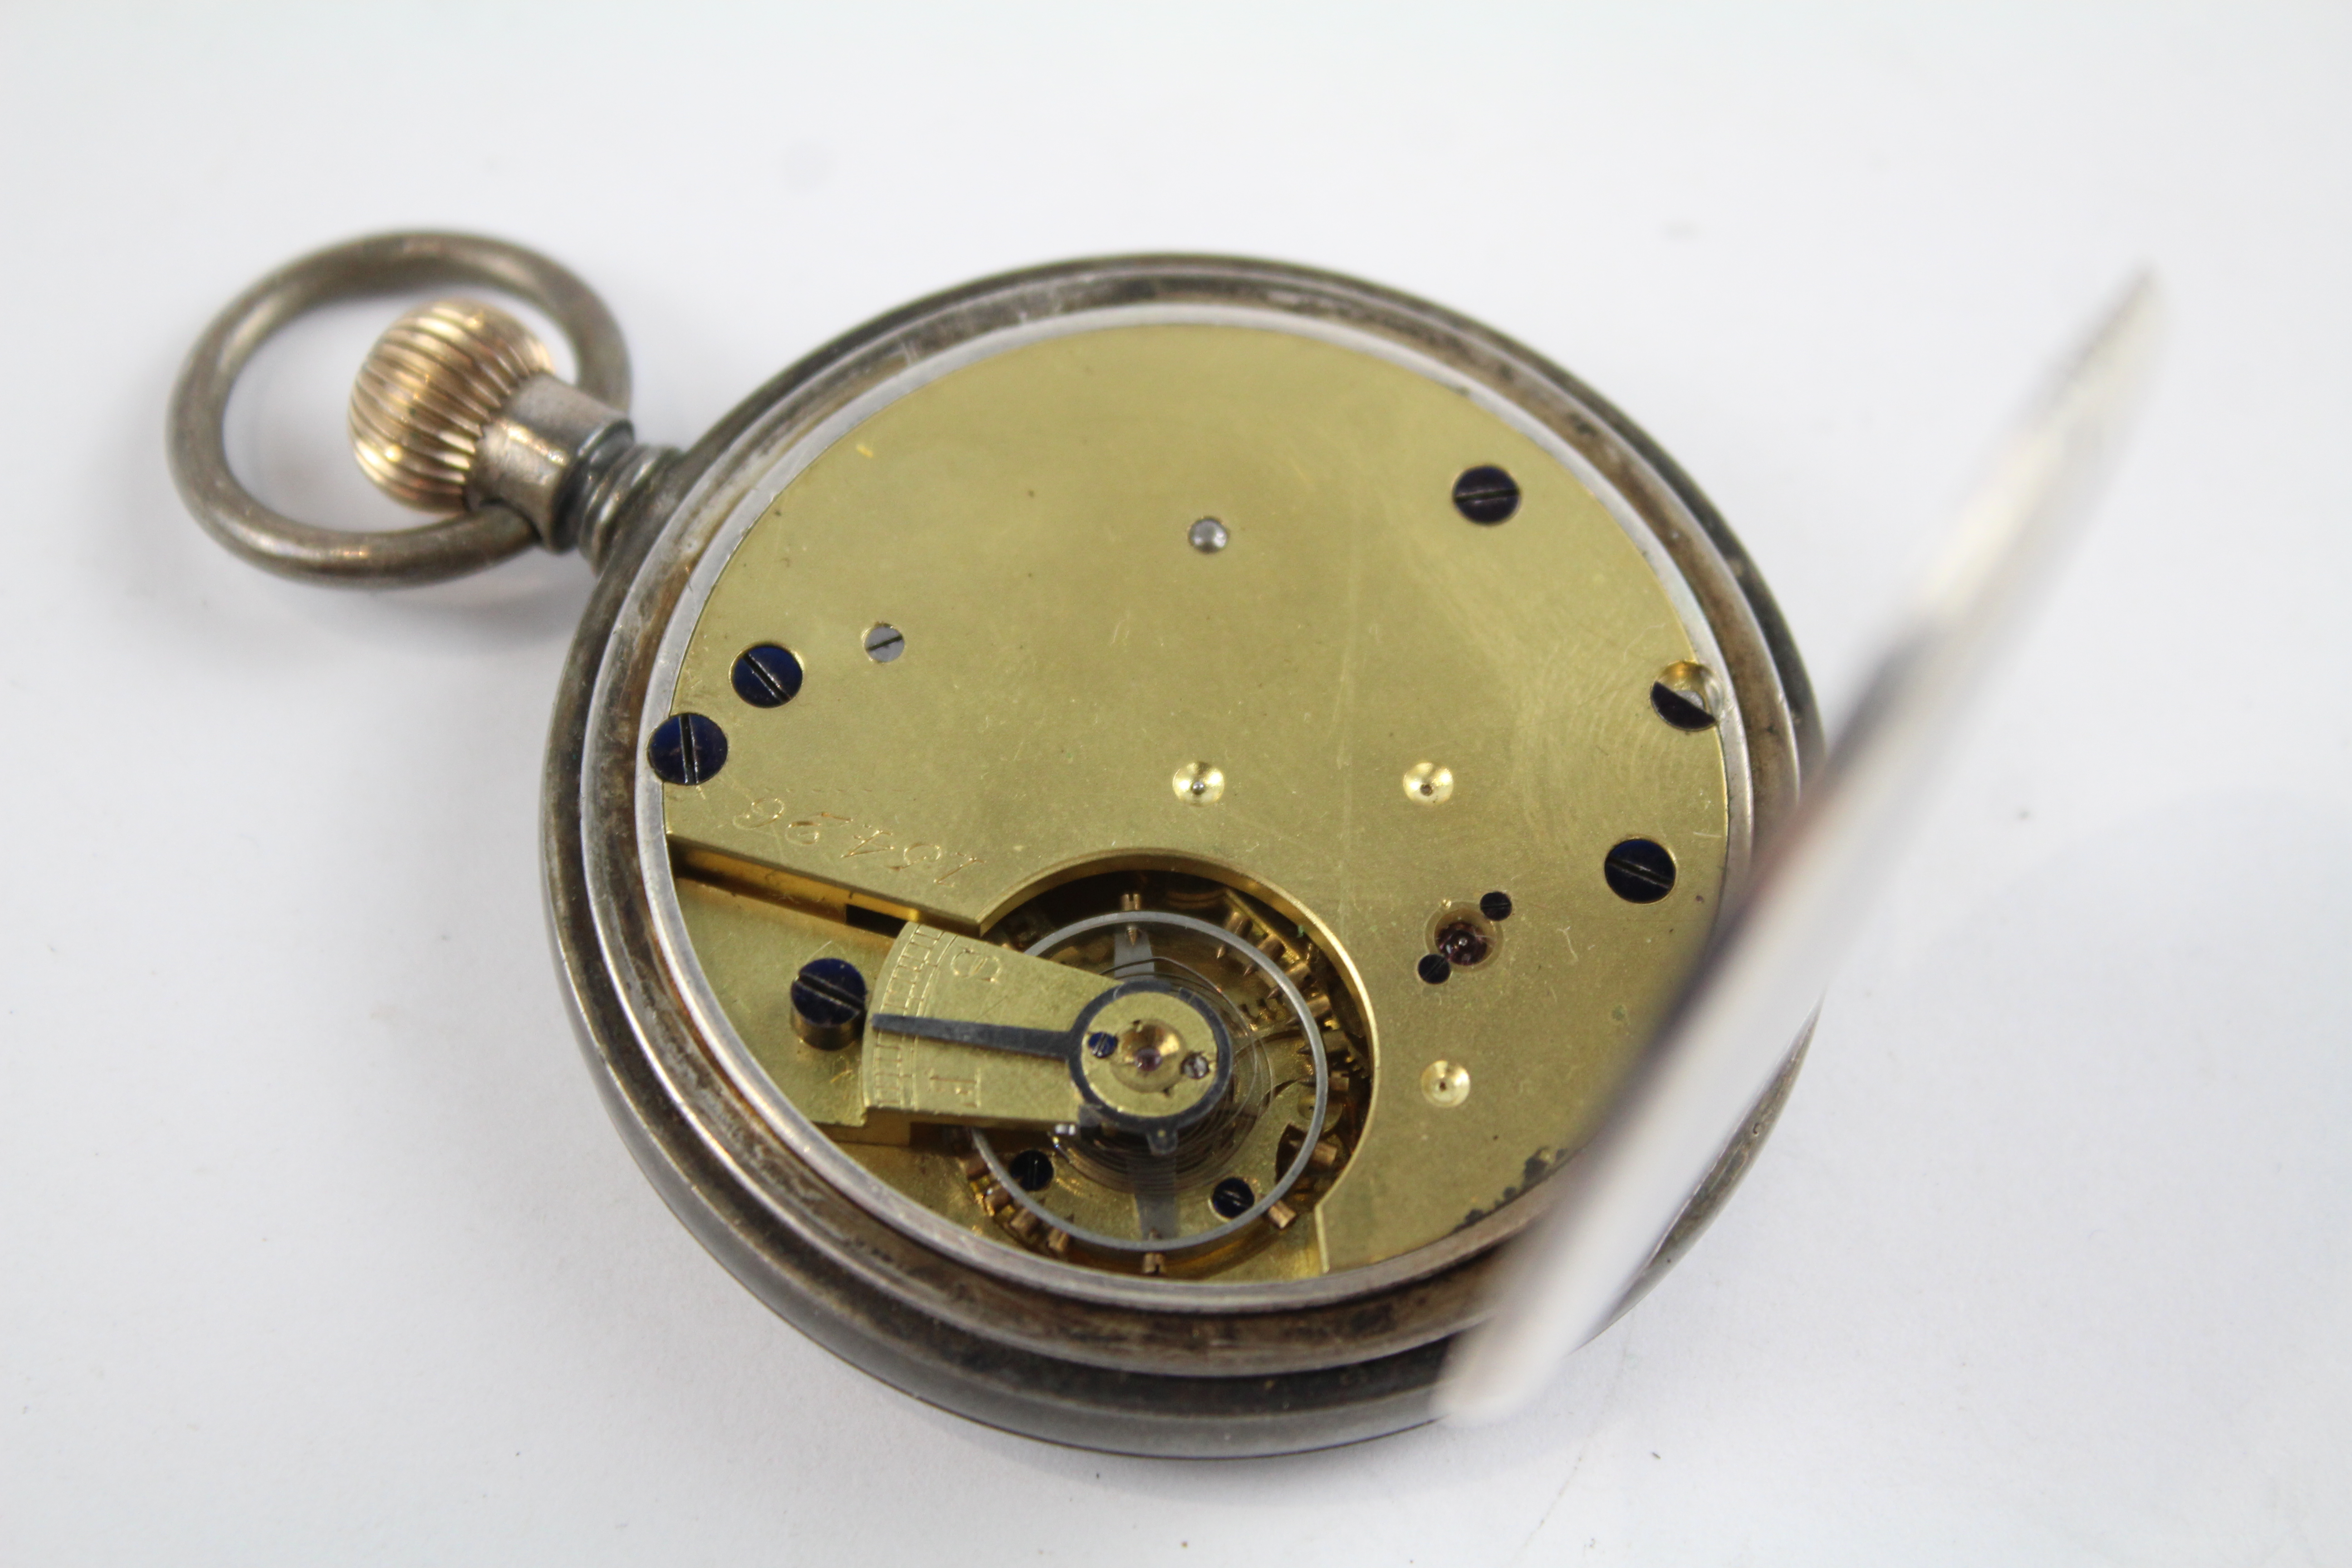 STERLING SILVER Gents Vintage Open Face POCKET WATCH Hand-Wind WORKING 404724 - Image 5 of 5